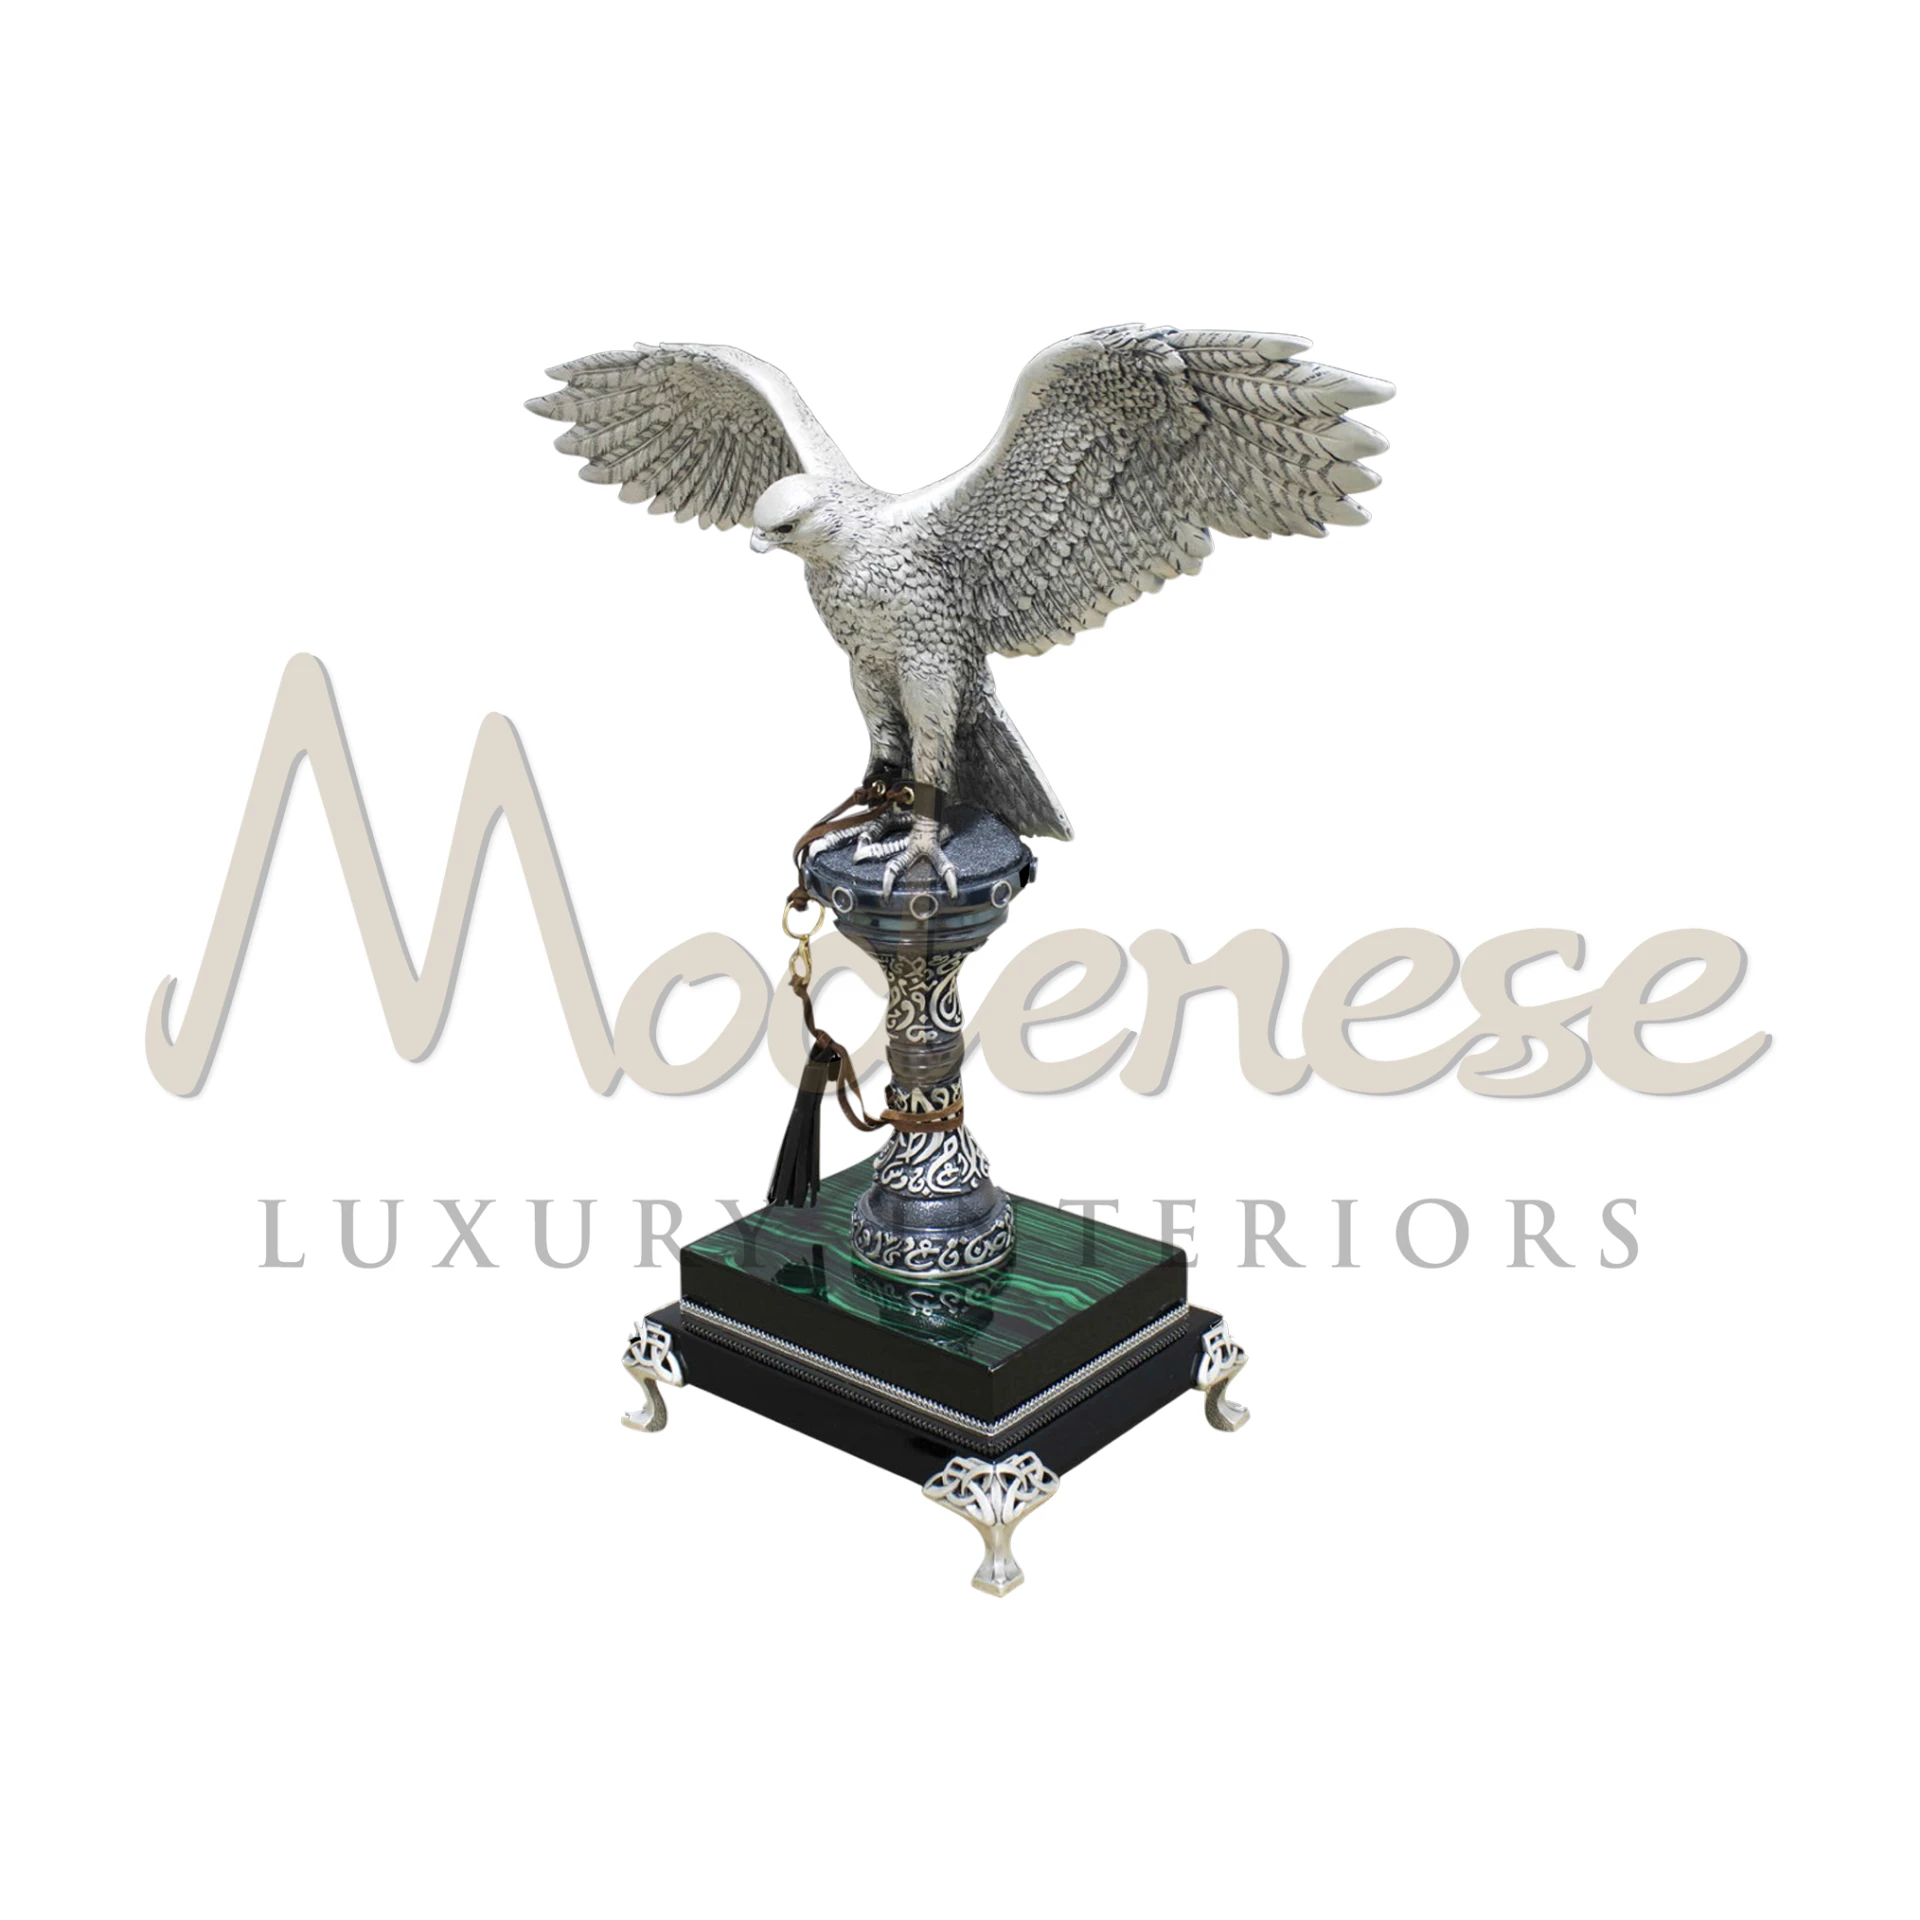 Imperial Falcon Statuette, crafted with grandeur, featuring detailed feather patterns and regal finishes, symbolizes power and elegance in luxury home décor.